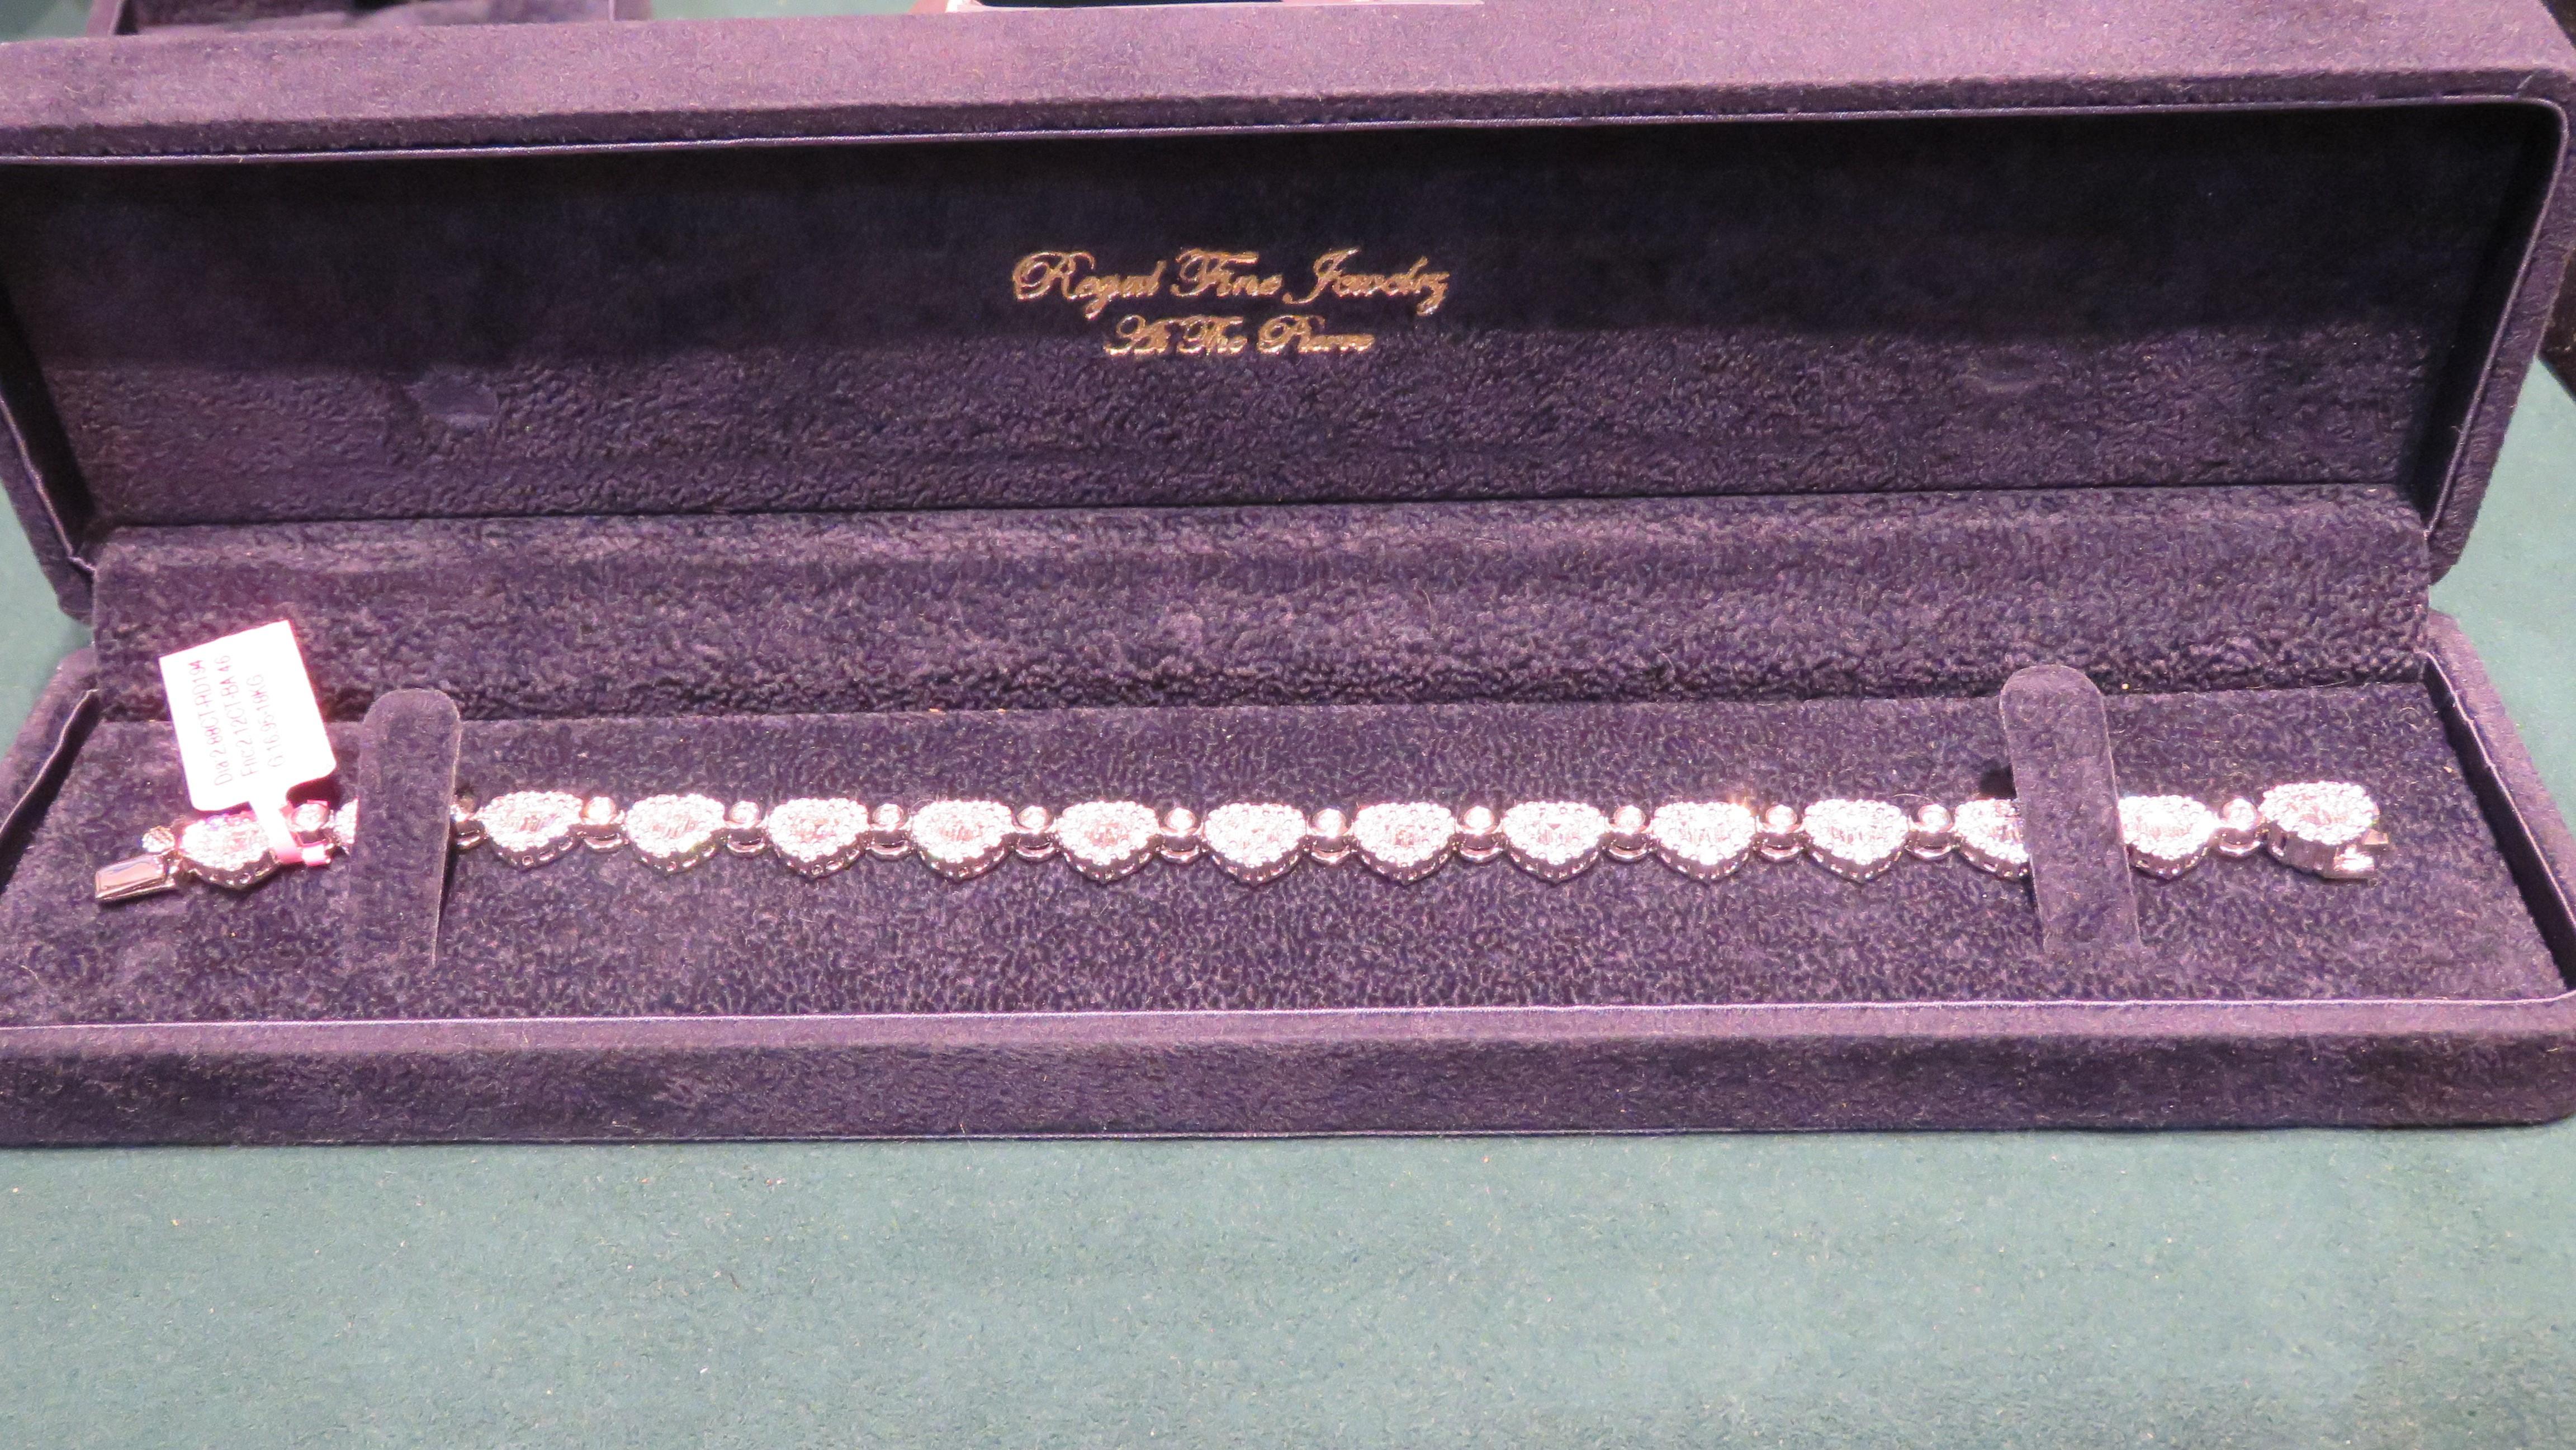 
The Following Item we are offering is a Rare 18KT Gold Heart Shaped Diamond Tennis Bracelet. Bracelet is comprised of Finely Set Gorgeous Glittering Diamonds. T.C.W. Over 5CTS. TheDiamonds are of Exquisite and Fine Quality. This Gorgeous Bracelet